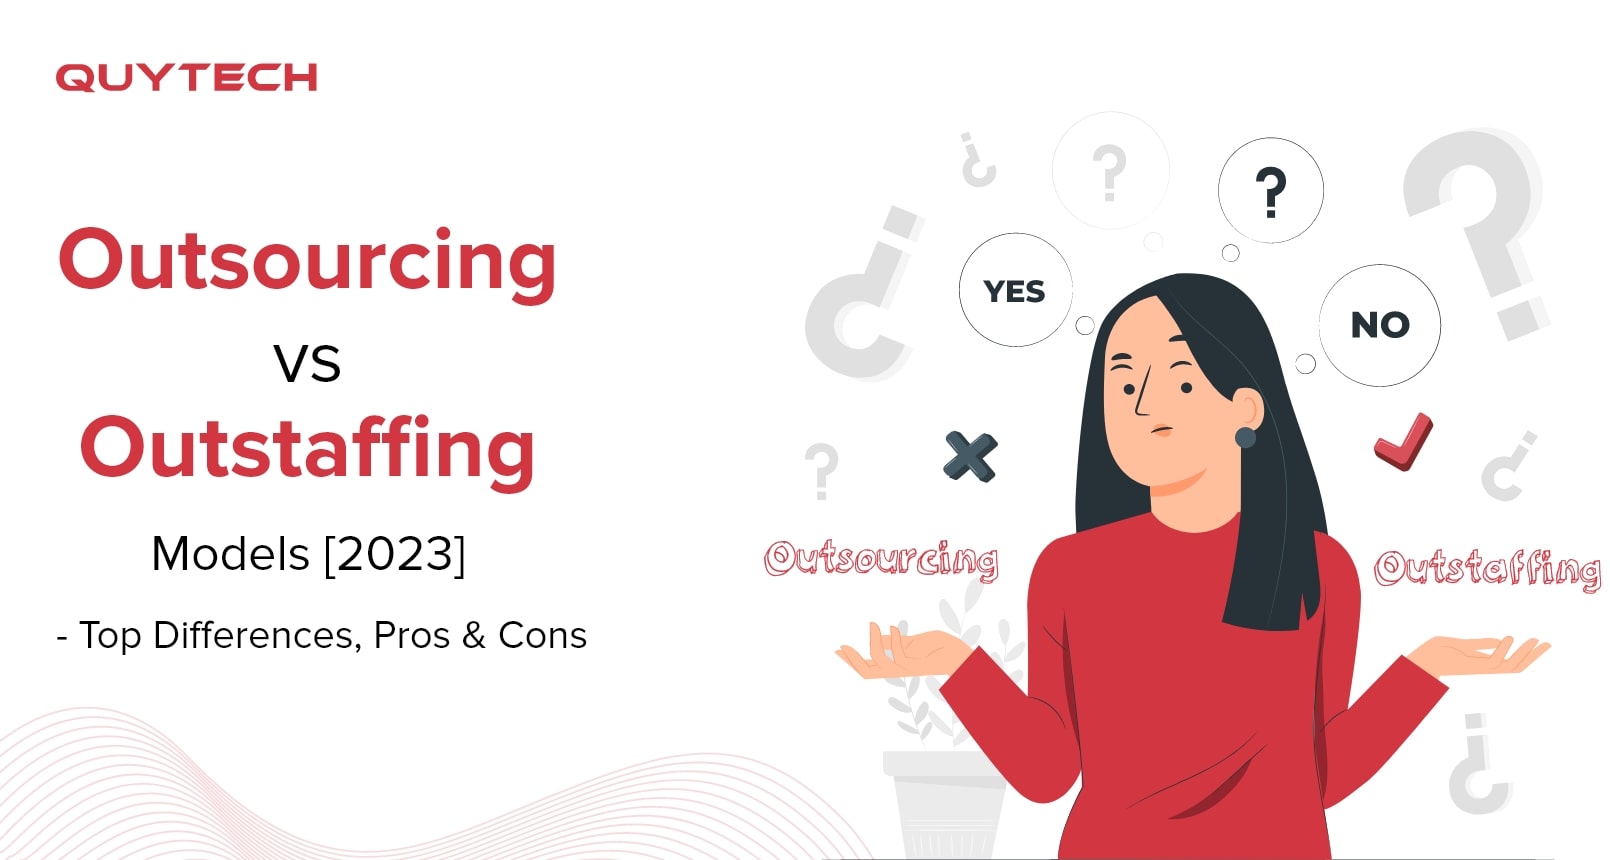 Outsourcing vs Outstaffing Models 2023: Differences, Pros & Cons